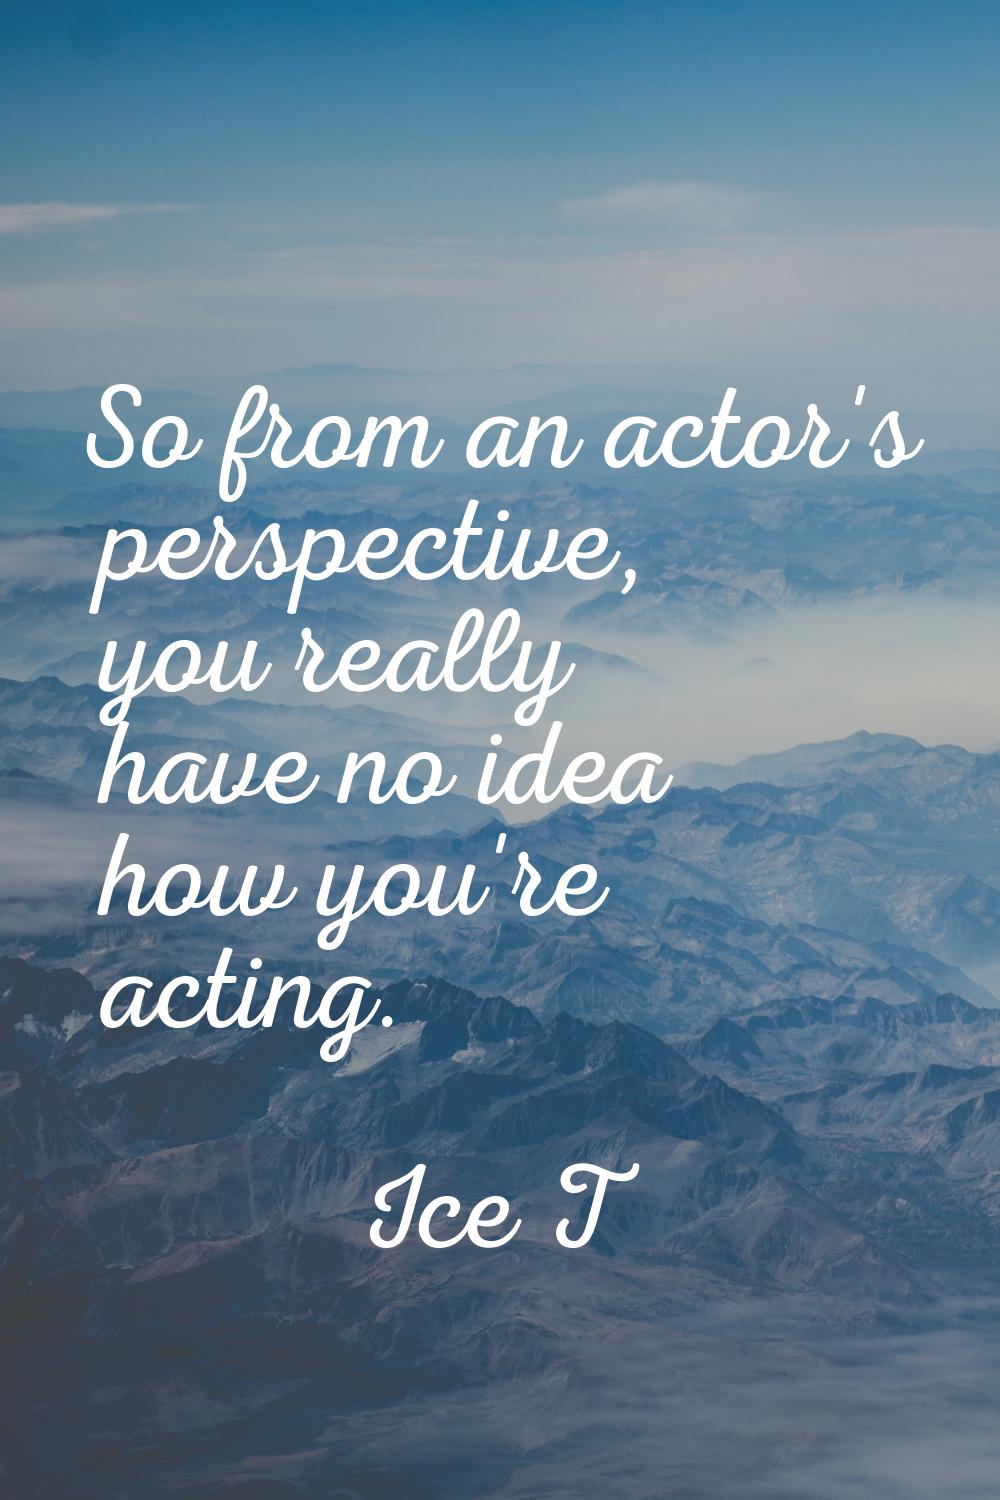 So from an actor's perspective, you really have no idea how you're acting.